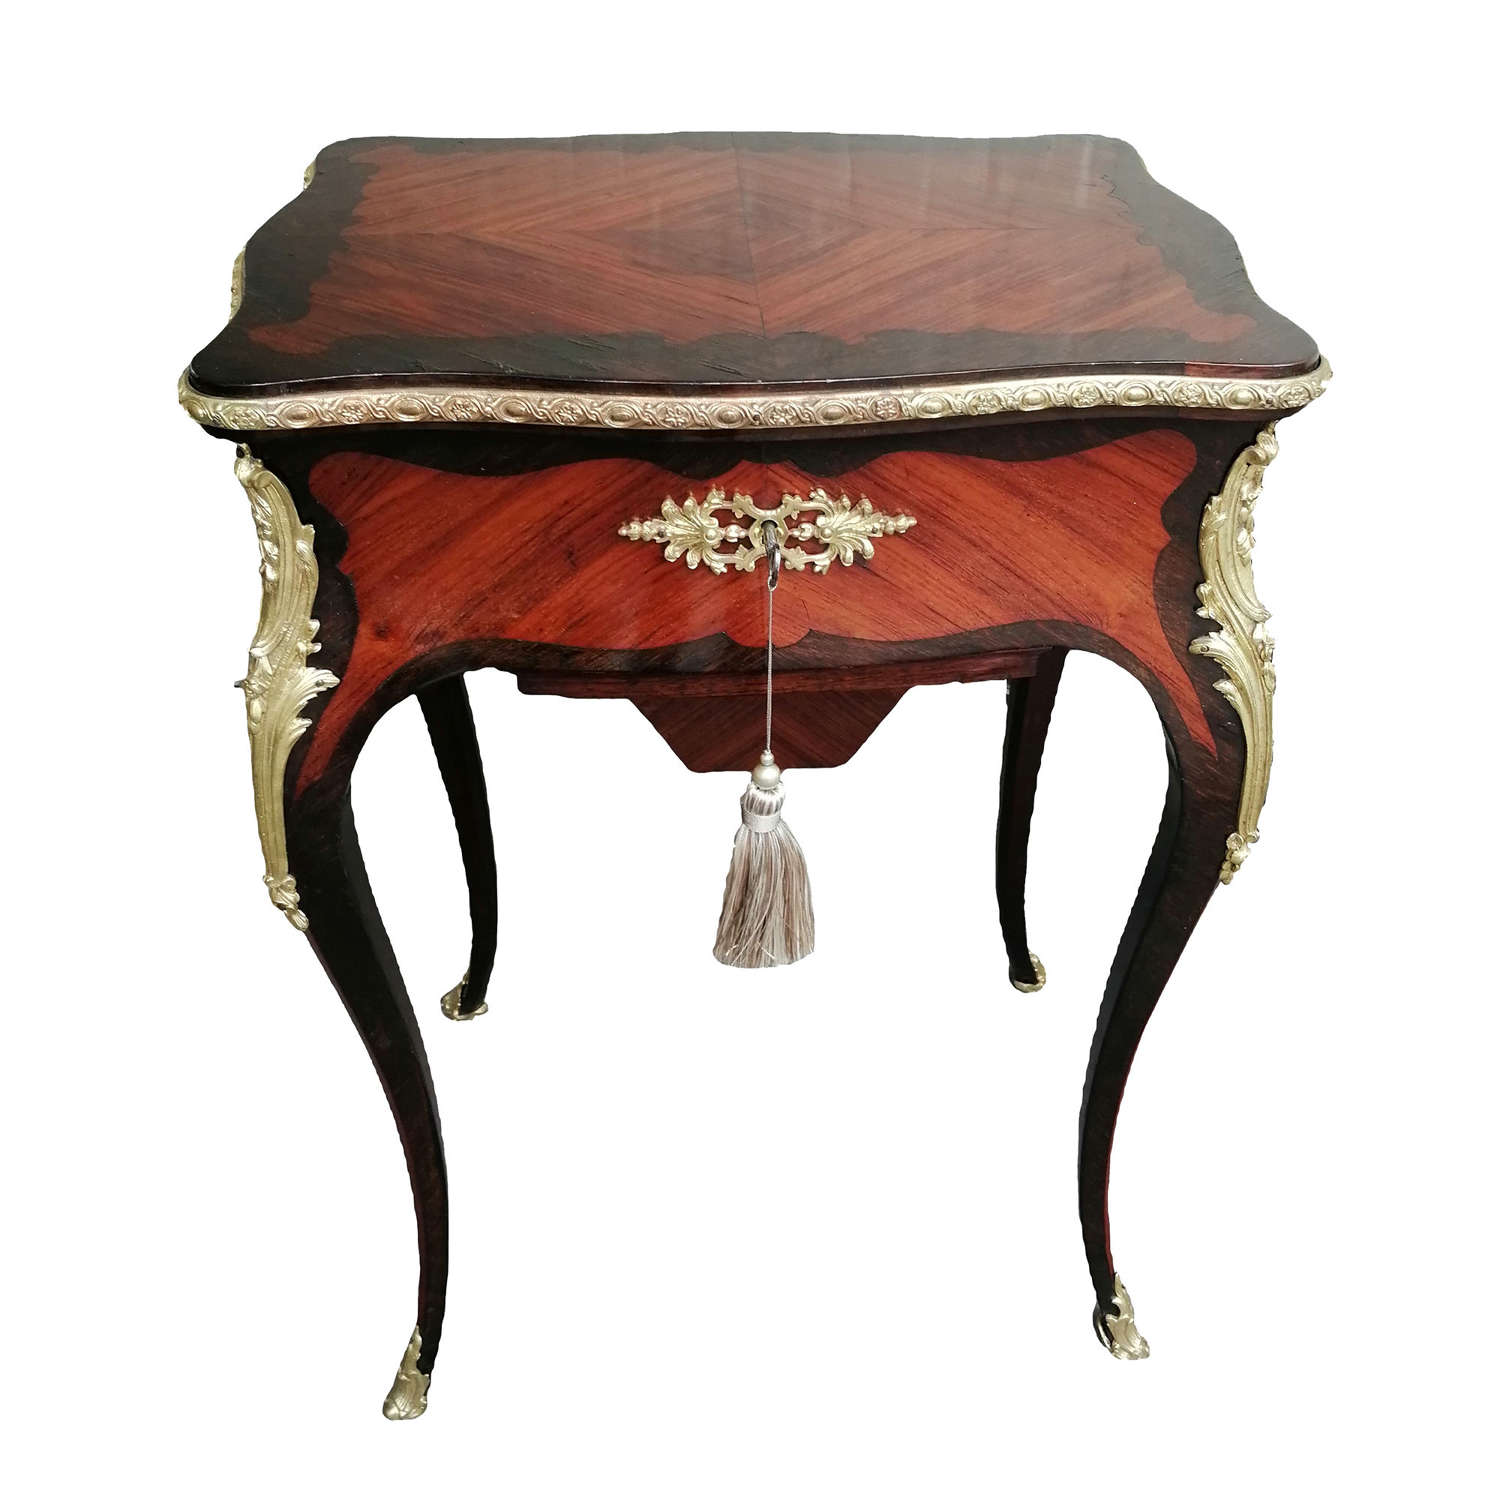 An outstanding quality 19th century French work/sewing table